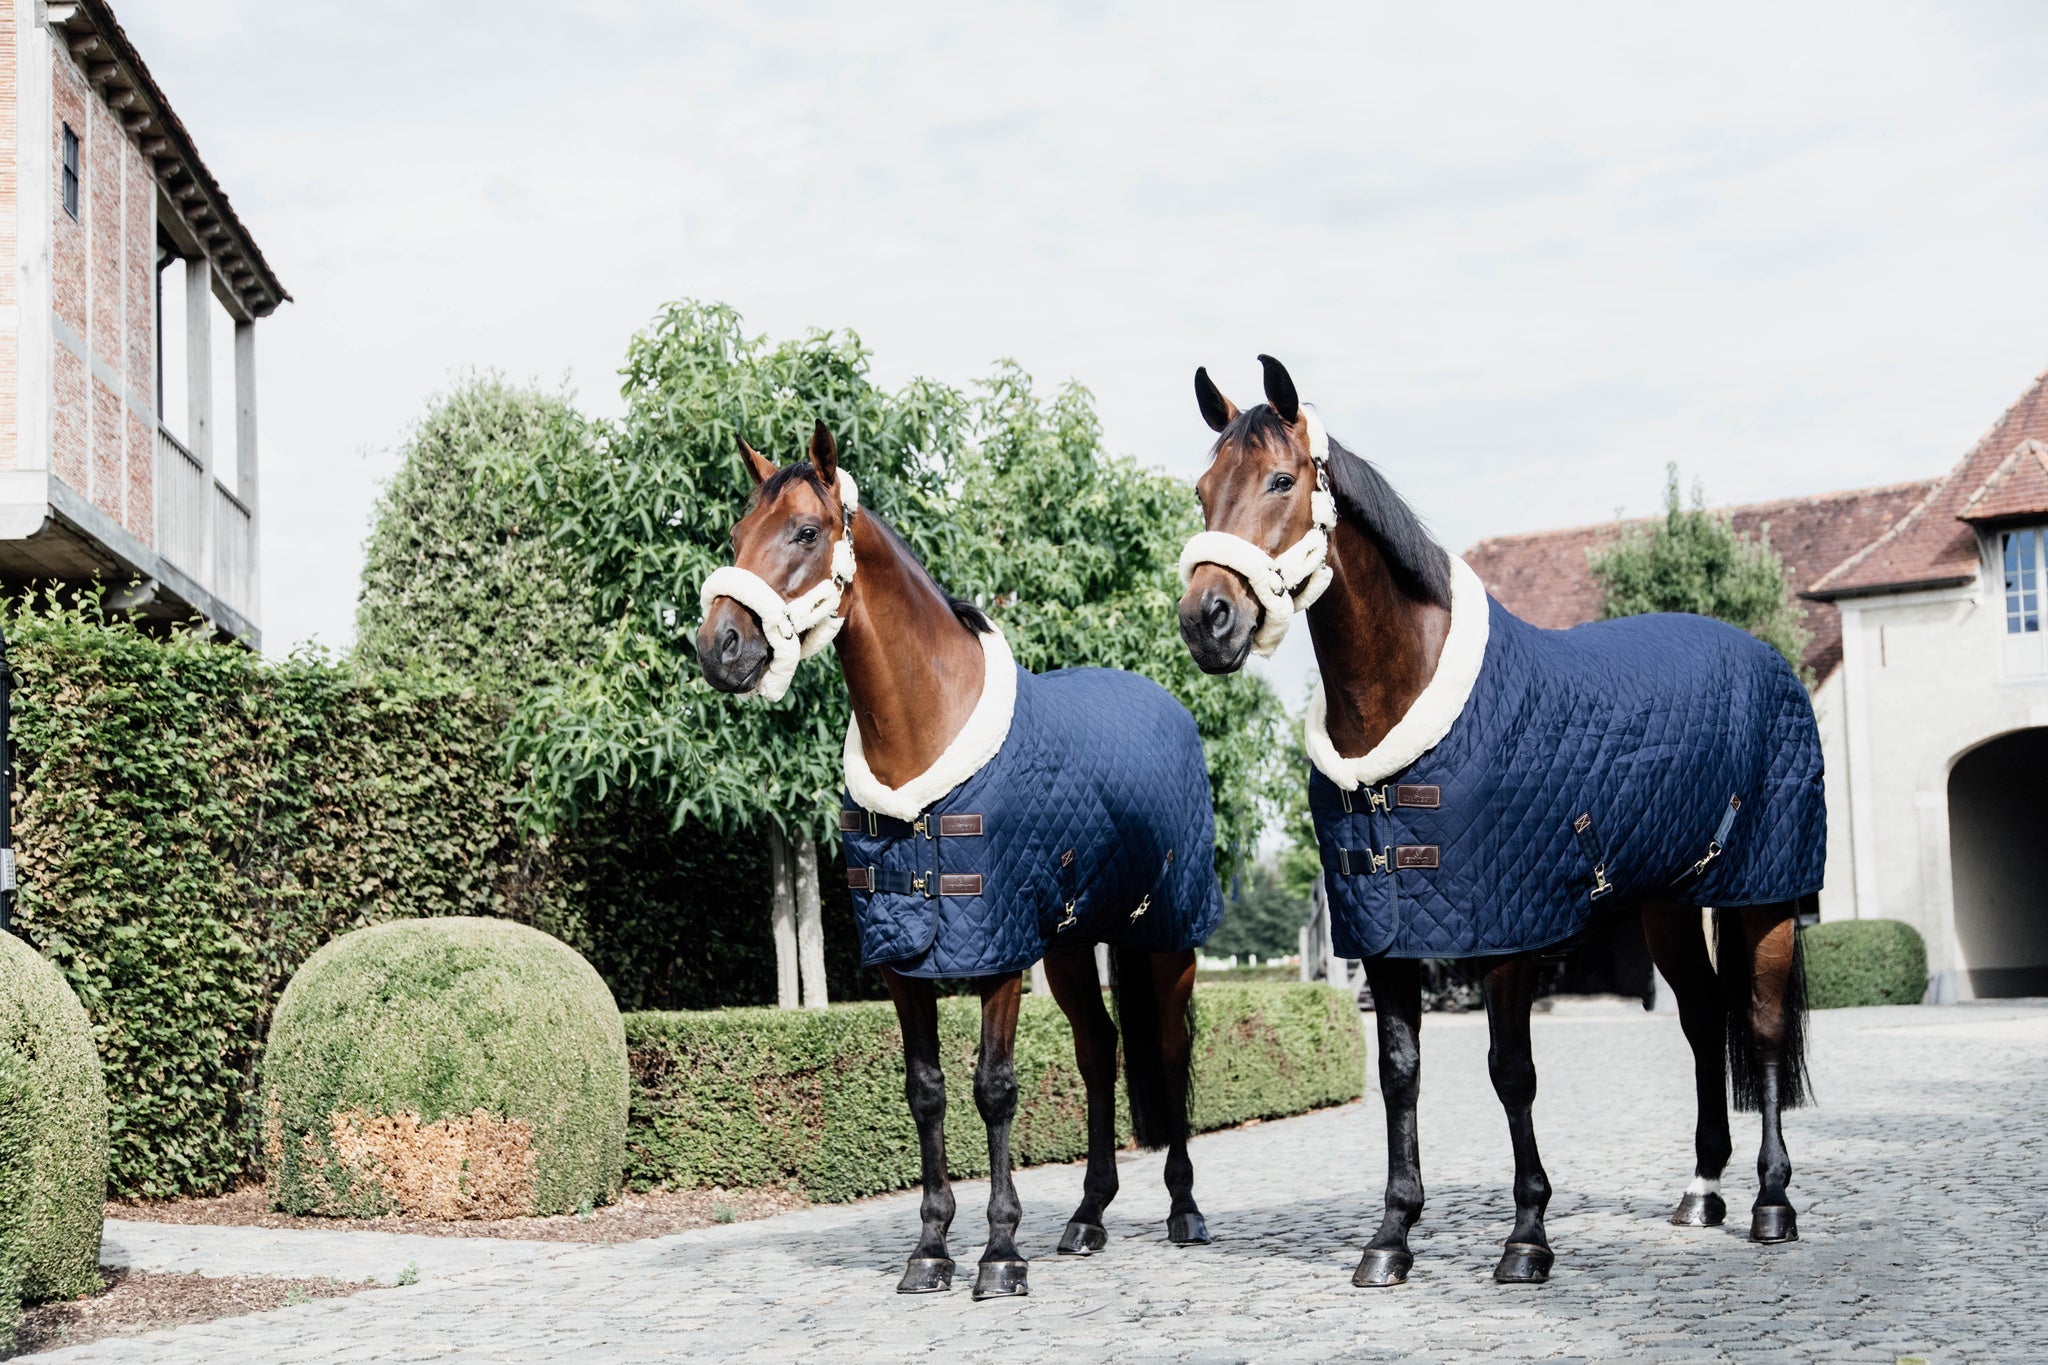 We stock a range of rugs from Kentucky and Equiline for your horse and pony.  Performance show rugs, stable rugs, travelling rugs, turnout rugs, waterproof rugs, magnetic rugs and fly rugs for your horse of pony. 